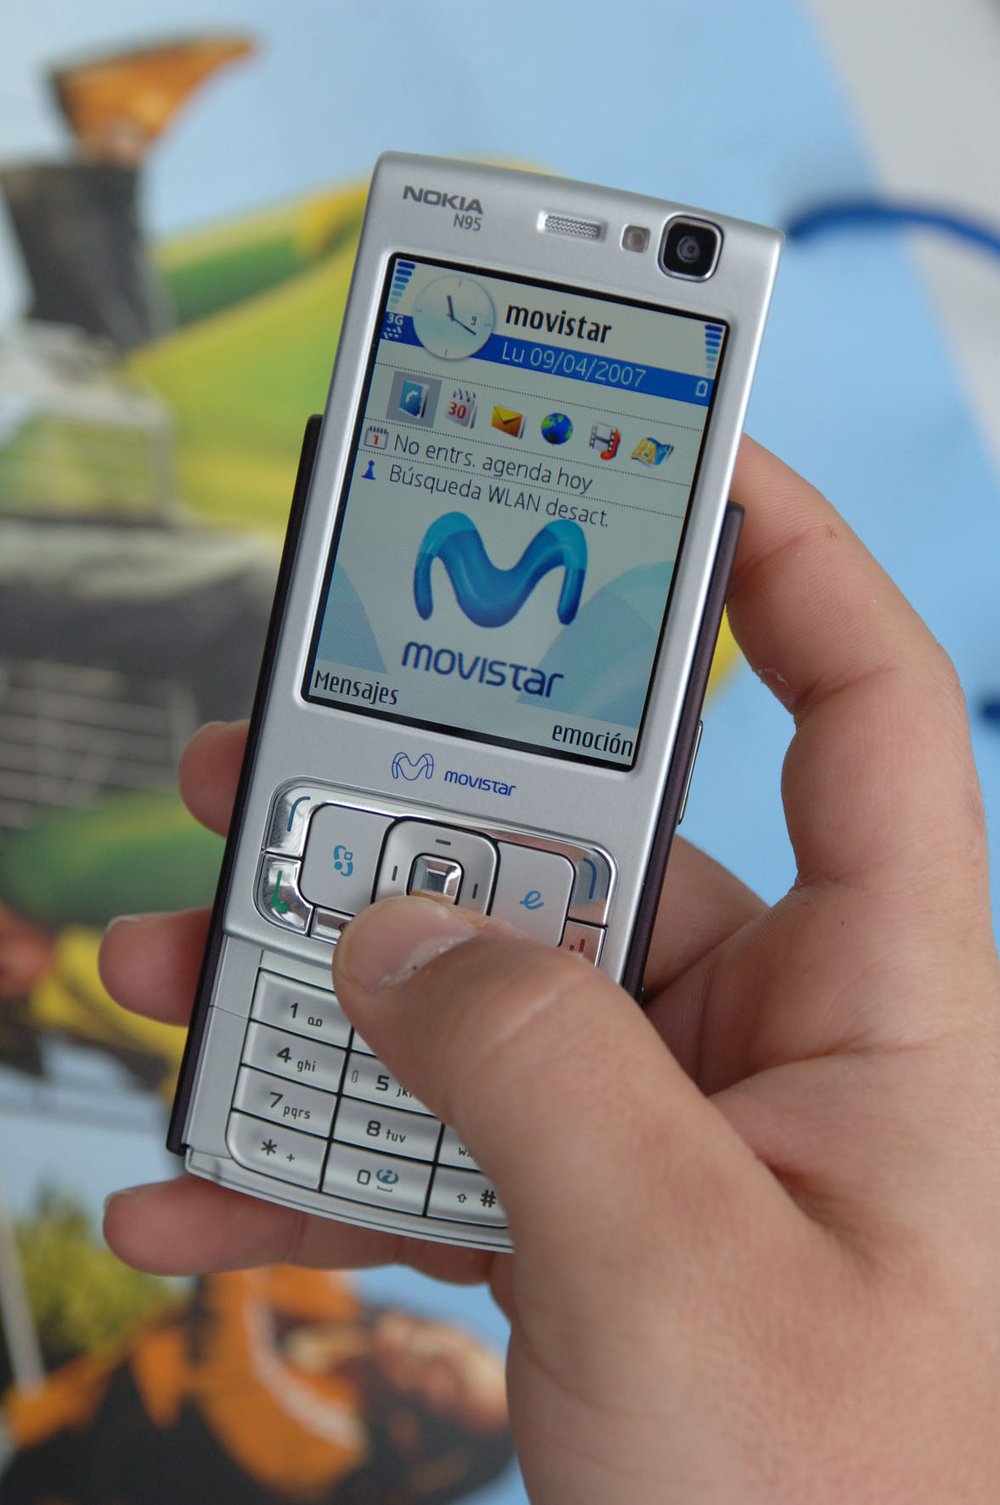 NOKIA N95 WITH MOVISTAR EMOTION SERVICES